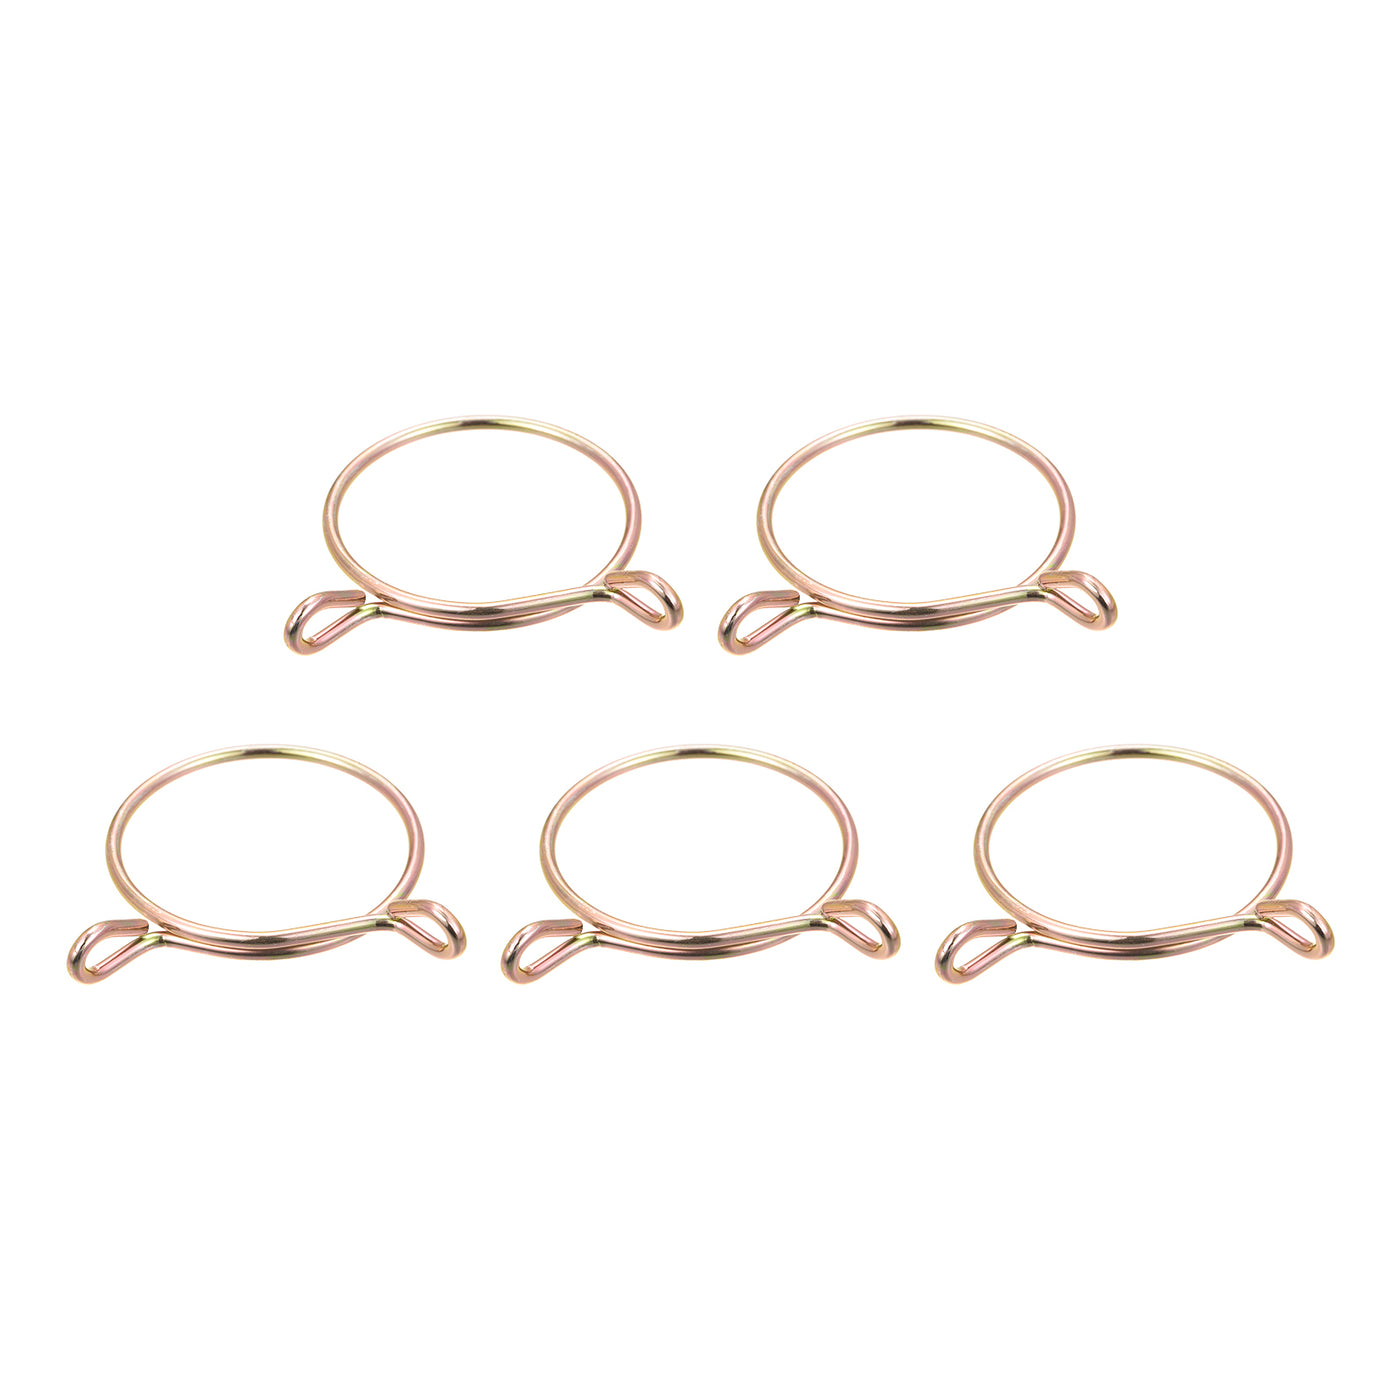 Uxcell Uxcell Fuel Line Hose Clips, 5pcs 50mm 65Mn Steel Tubing Spring Clamps